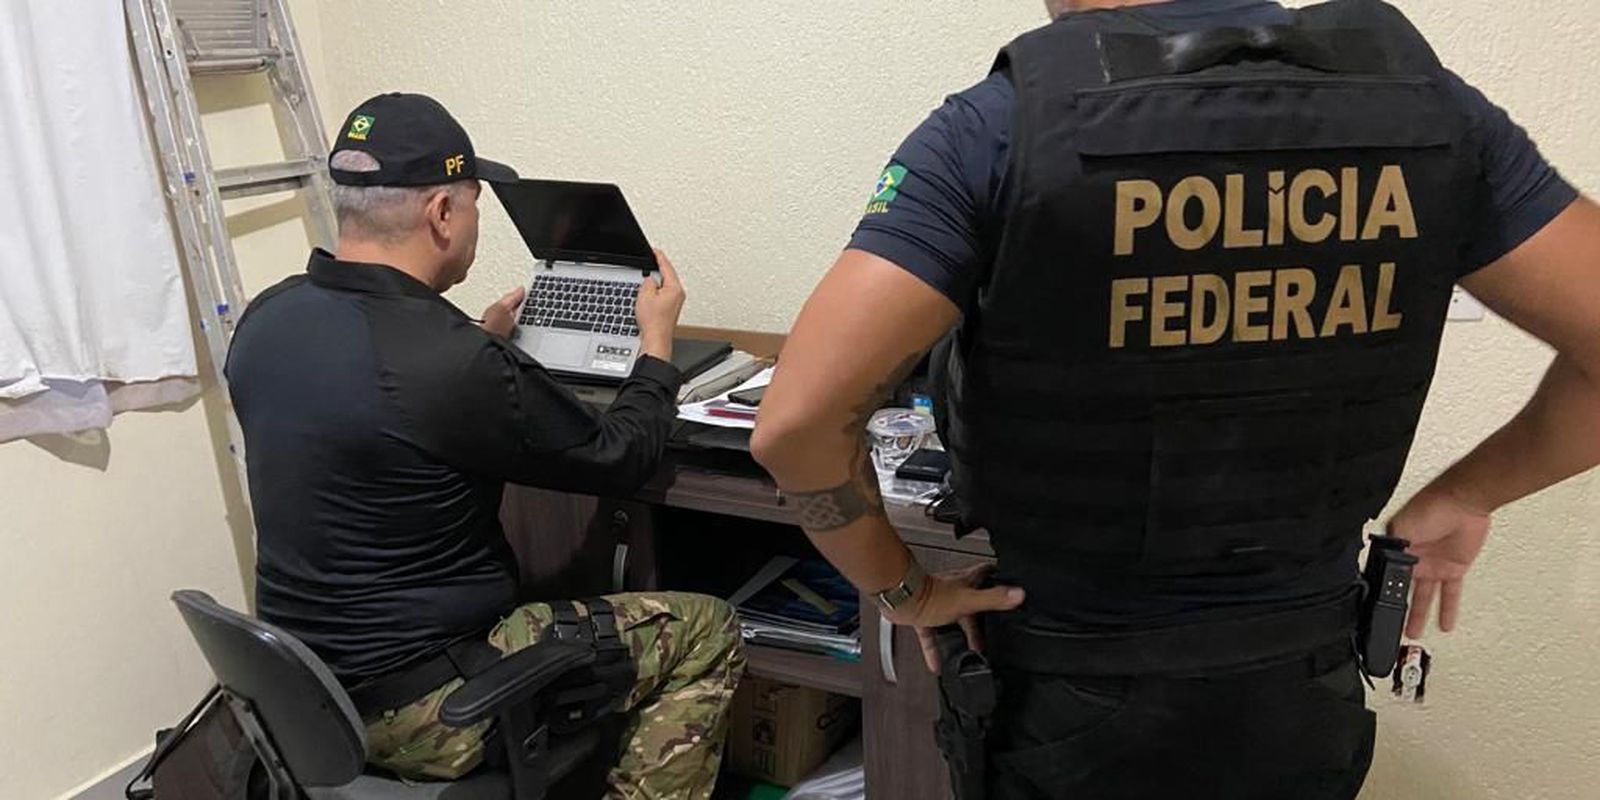 PF carries out joint operations against child pornography in Rio